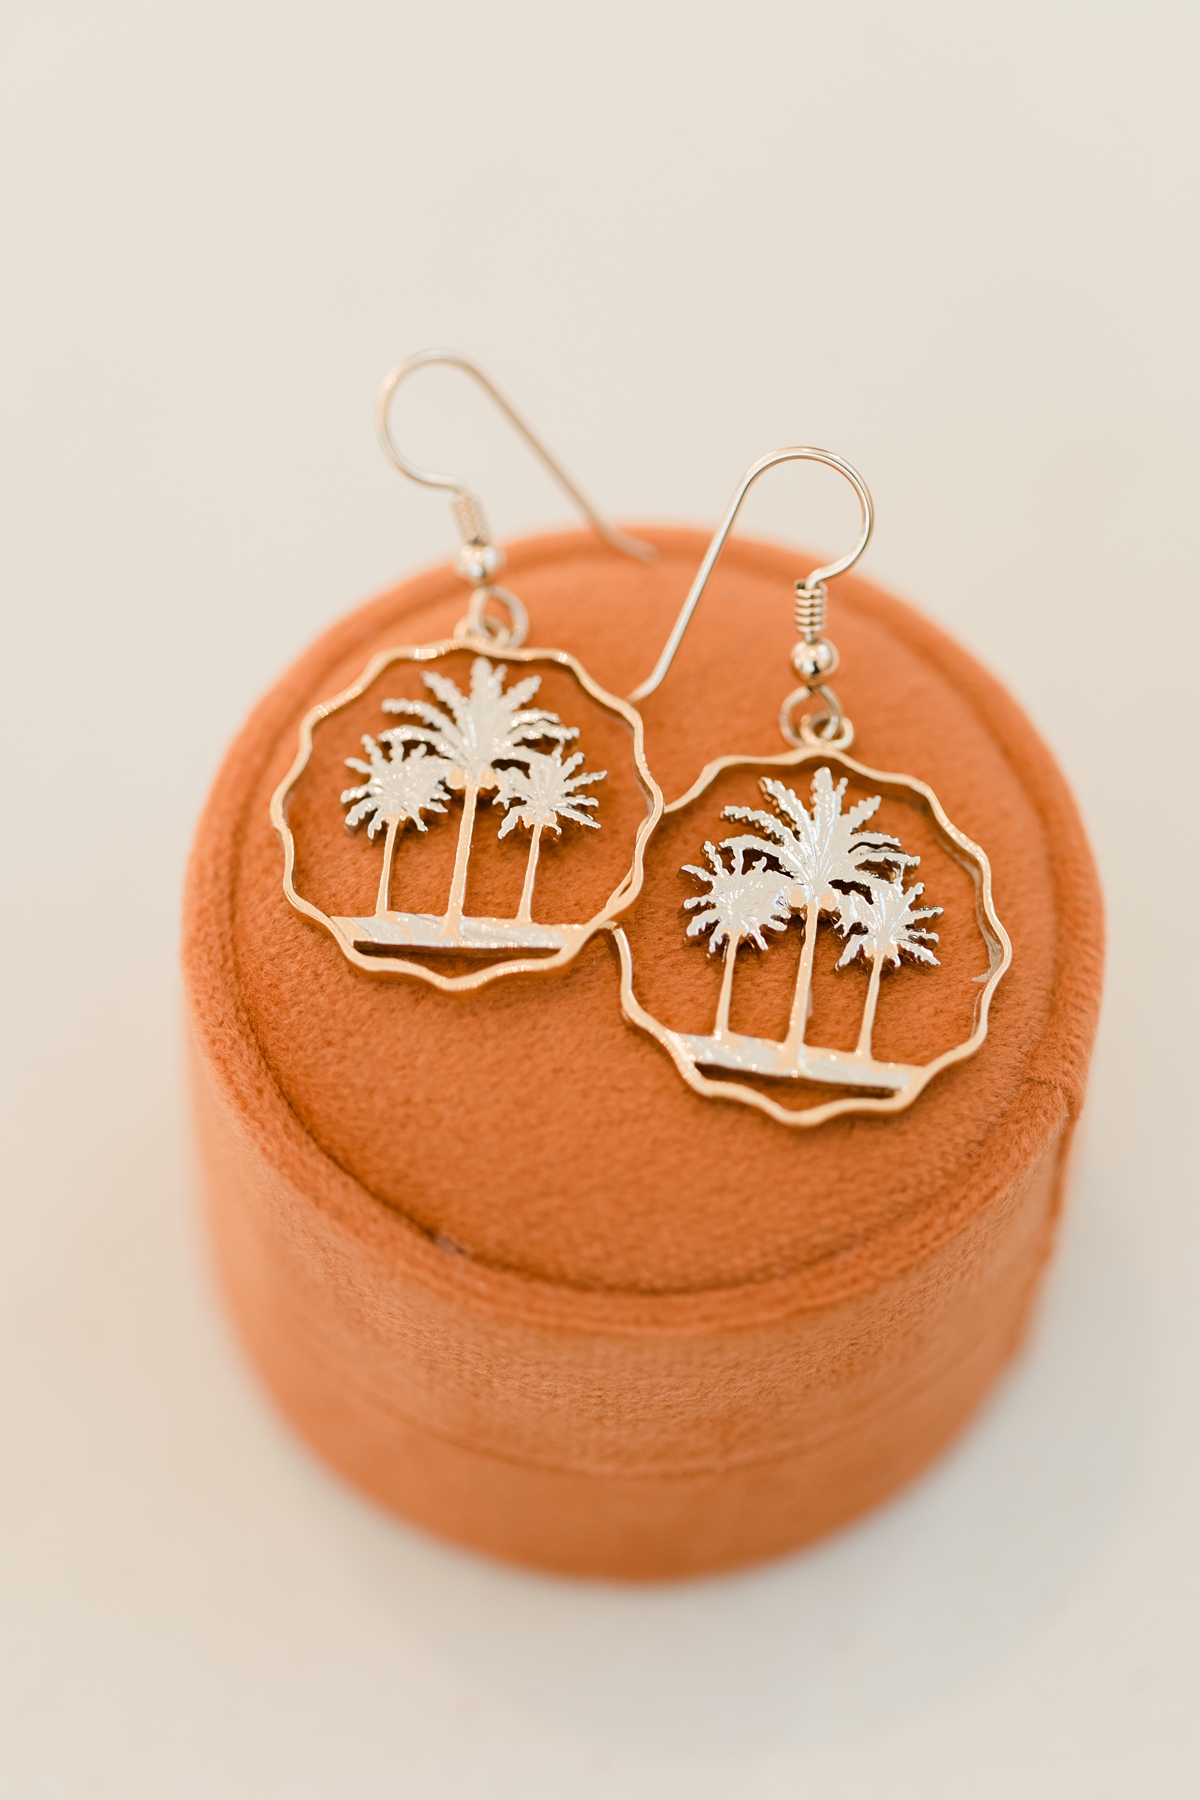 Three palm trees gold earrings for bride on wedding day on orange jewelery box